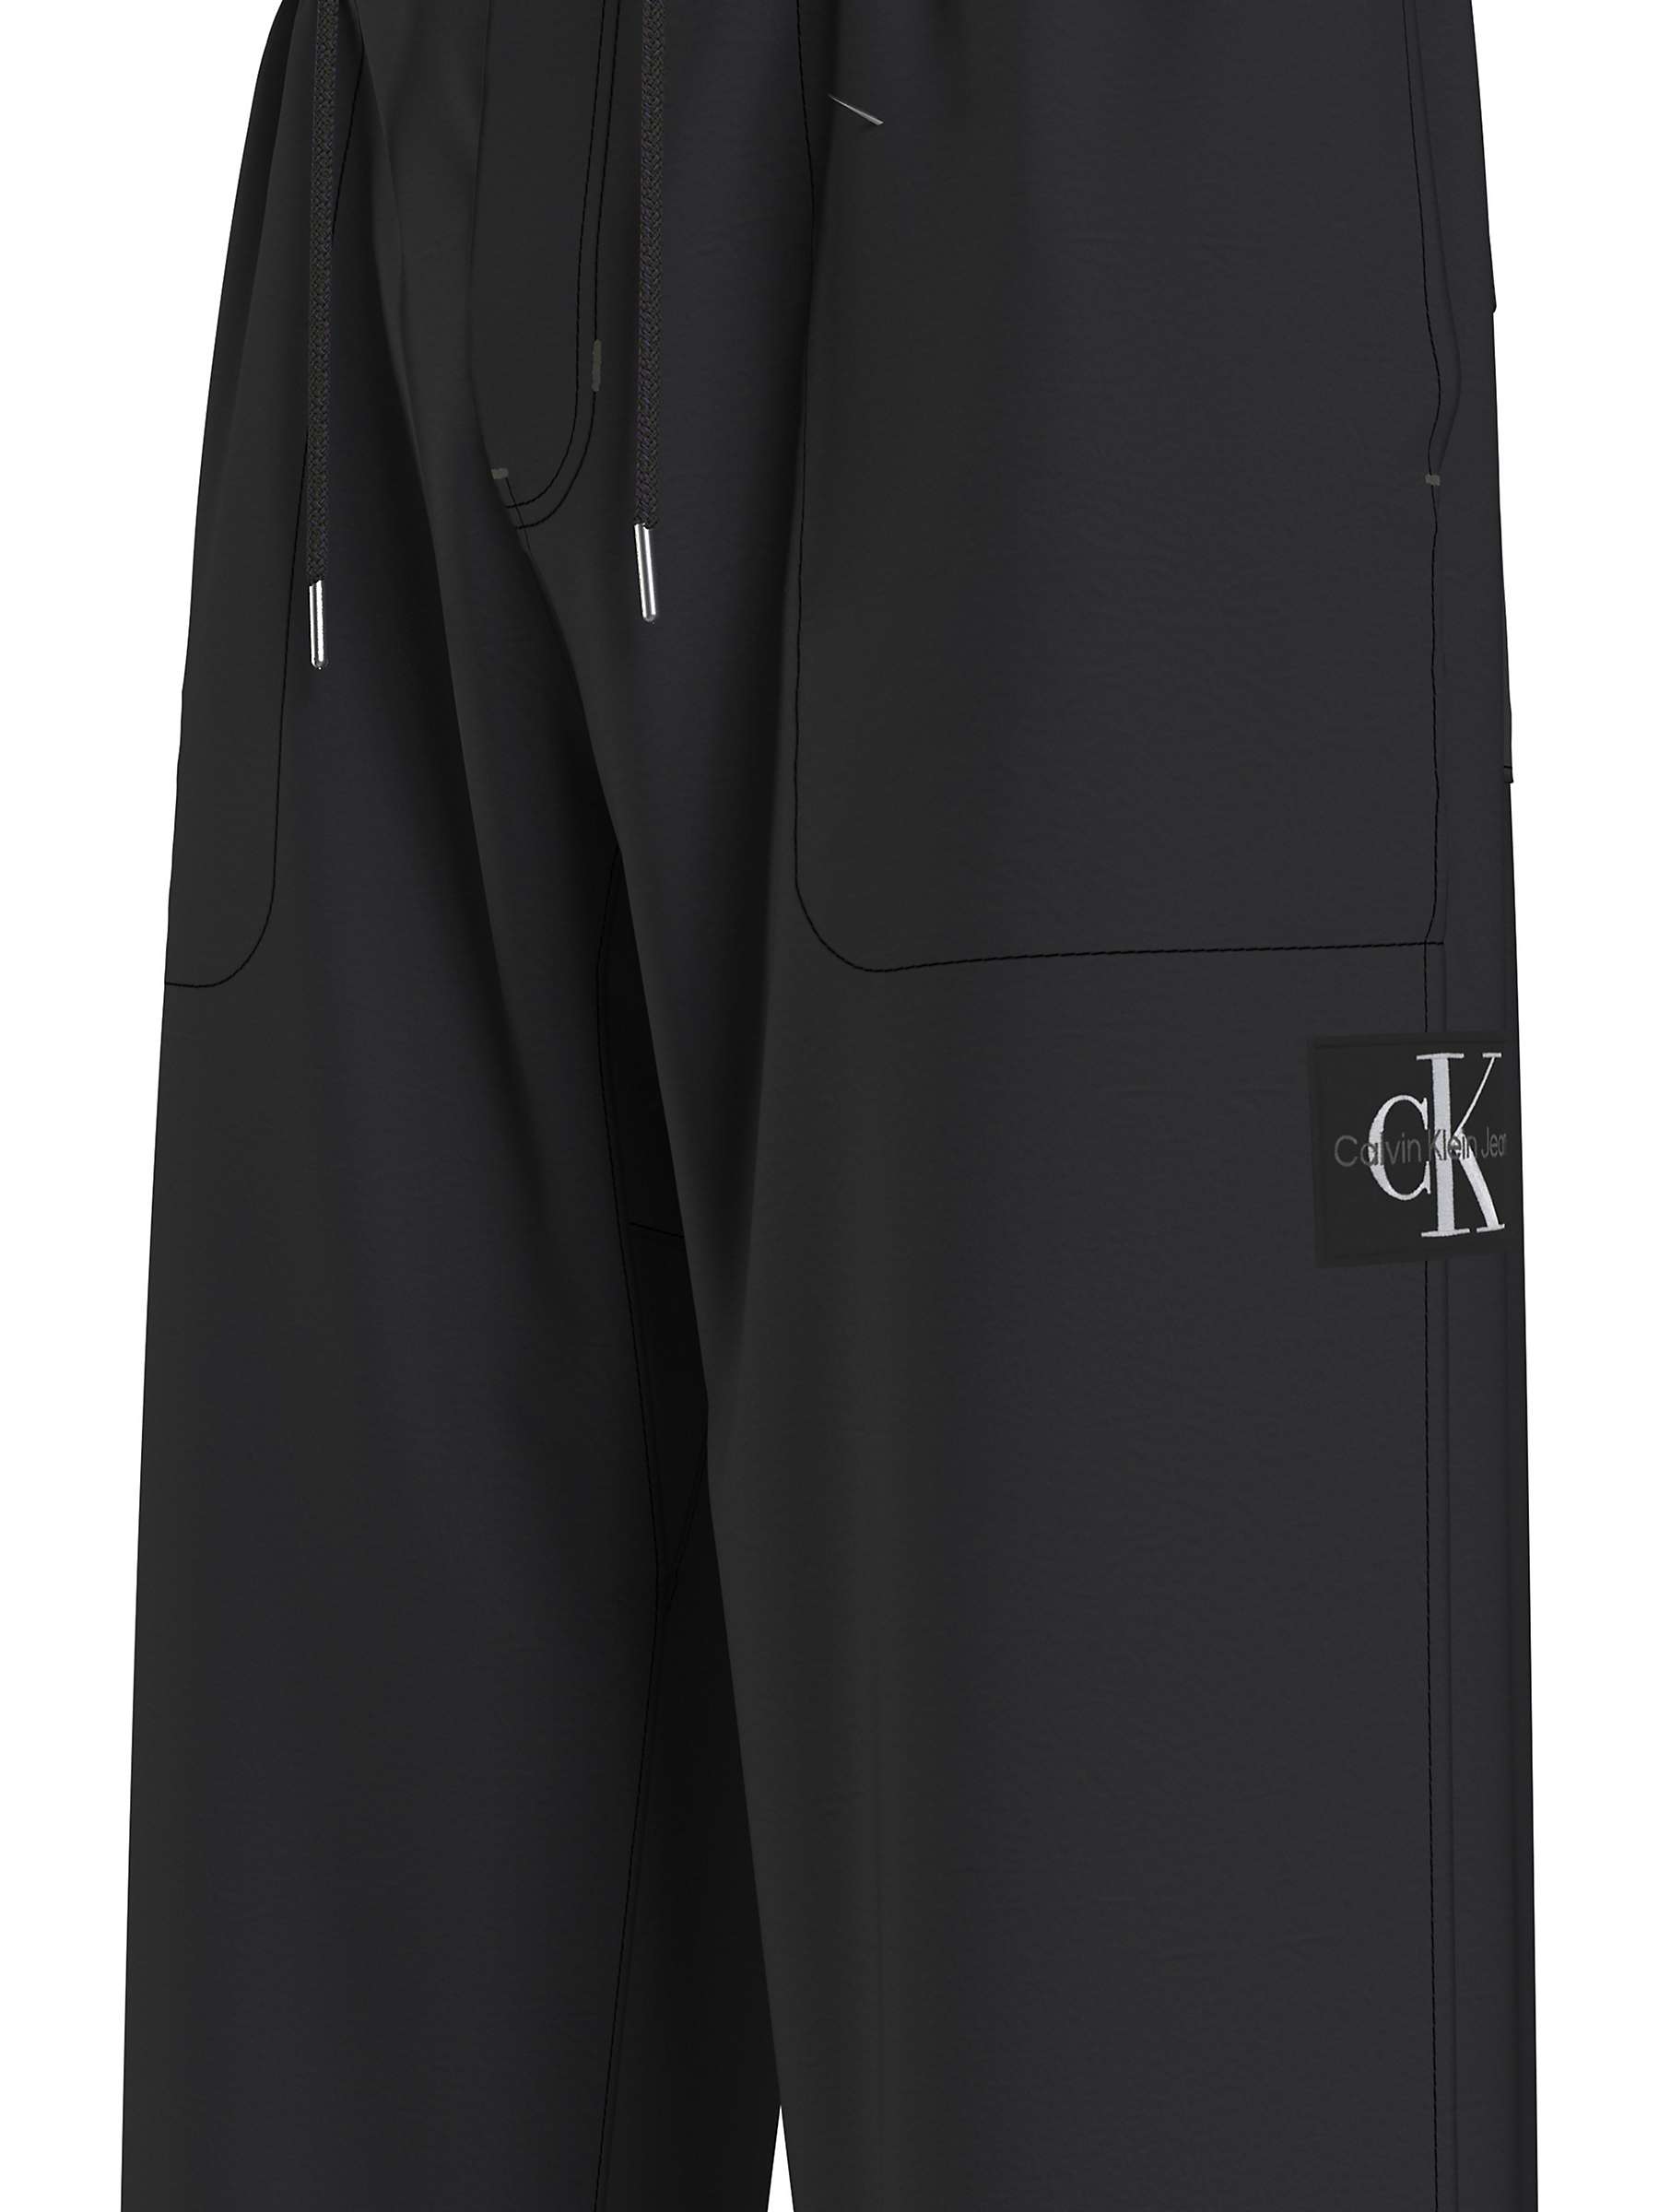 Buy Calvin Klein Jeans Trim Woven Trousers Online at johnlewis.com